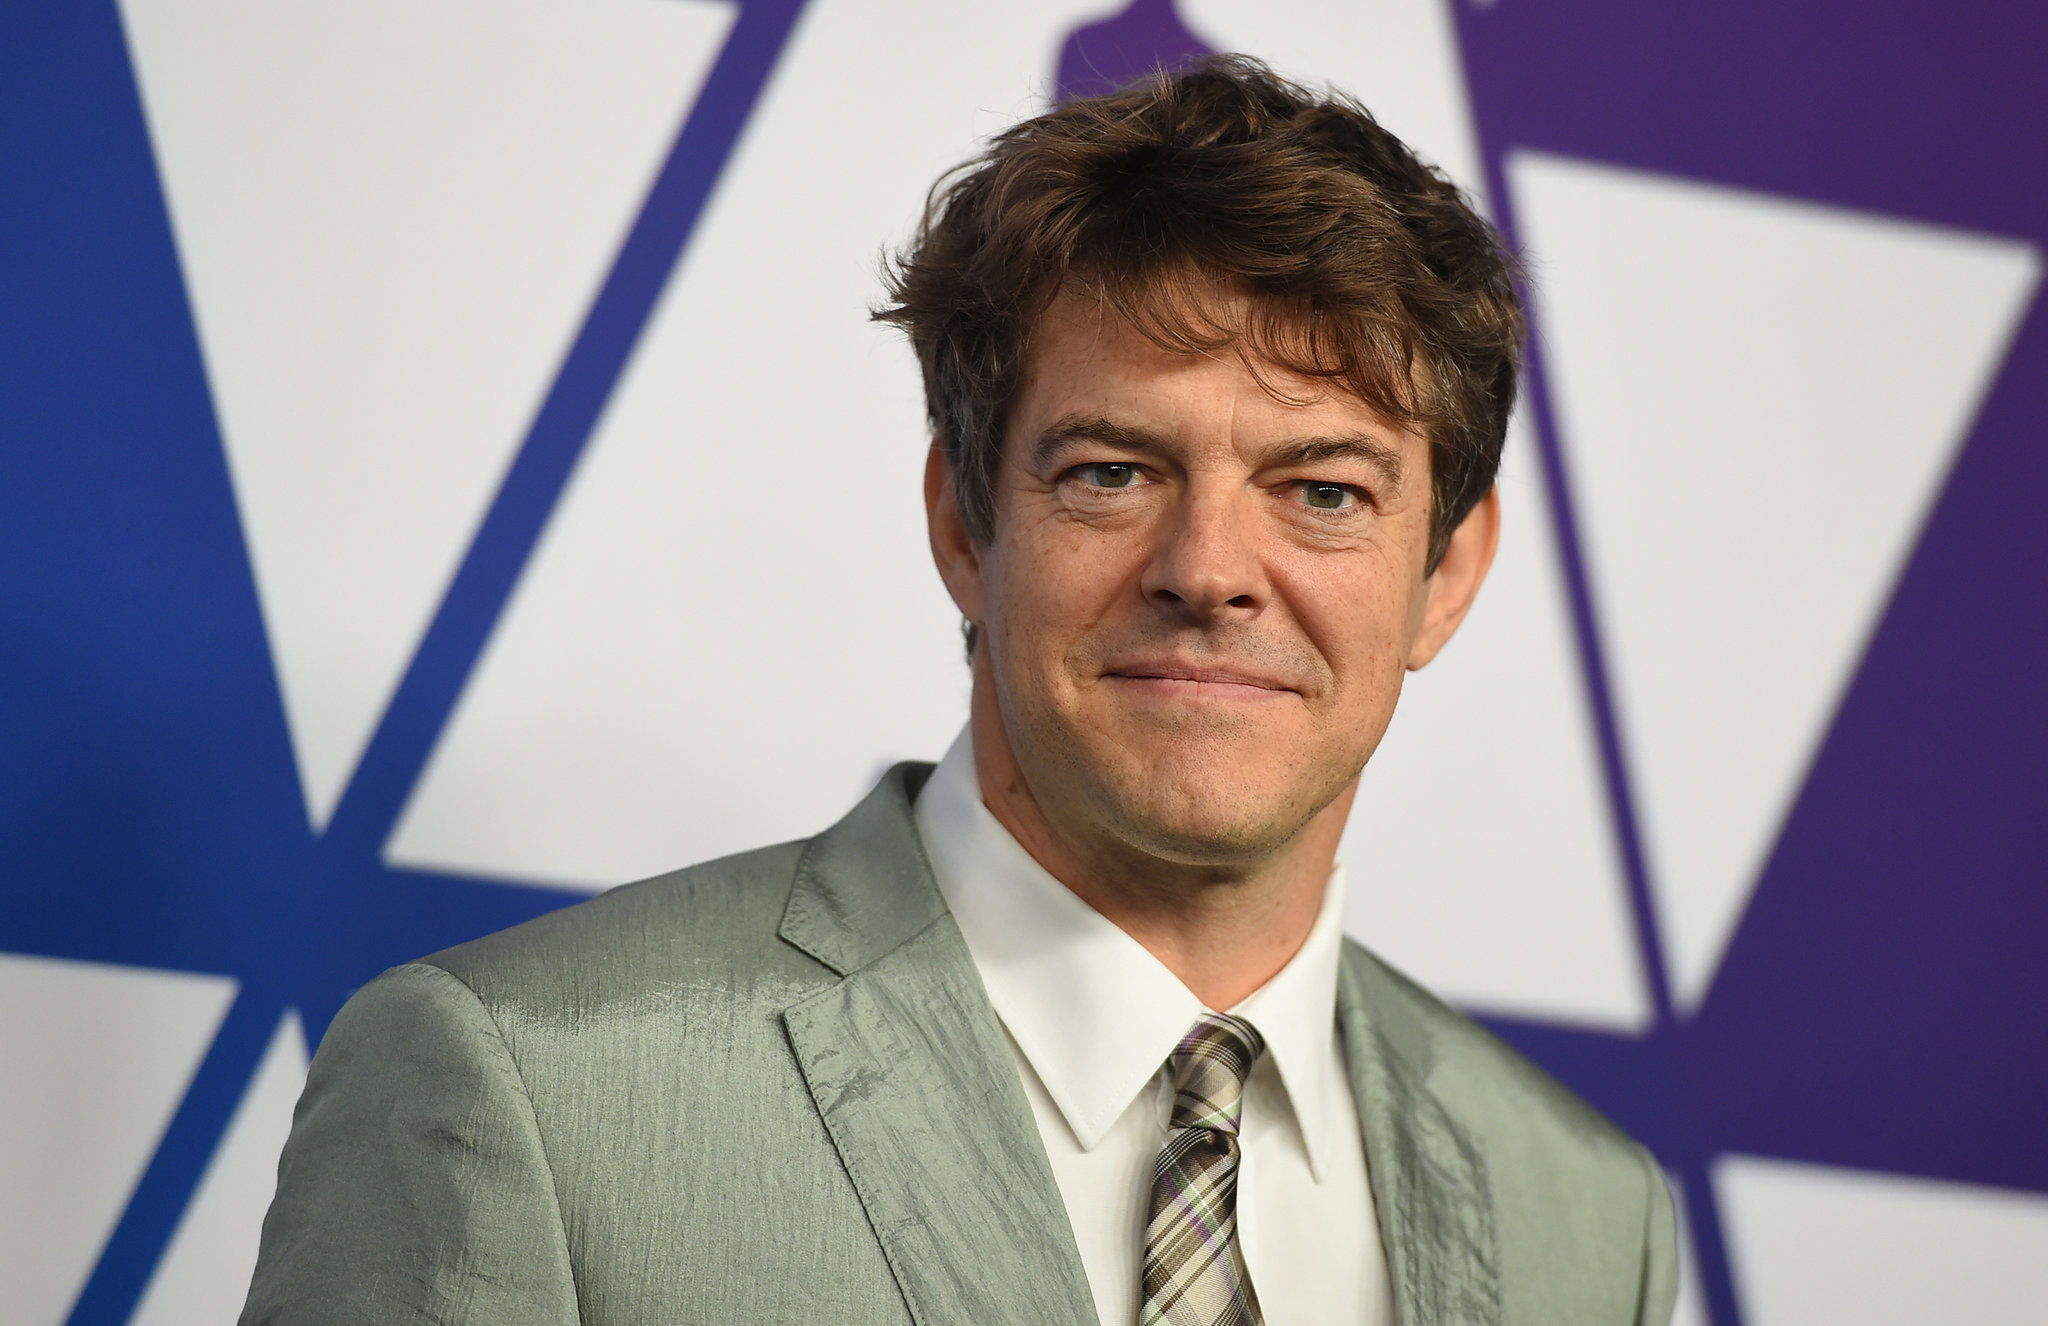 Jason Blum, CEO and founder of Blumhouse Productions